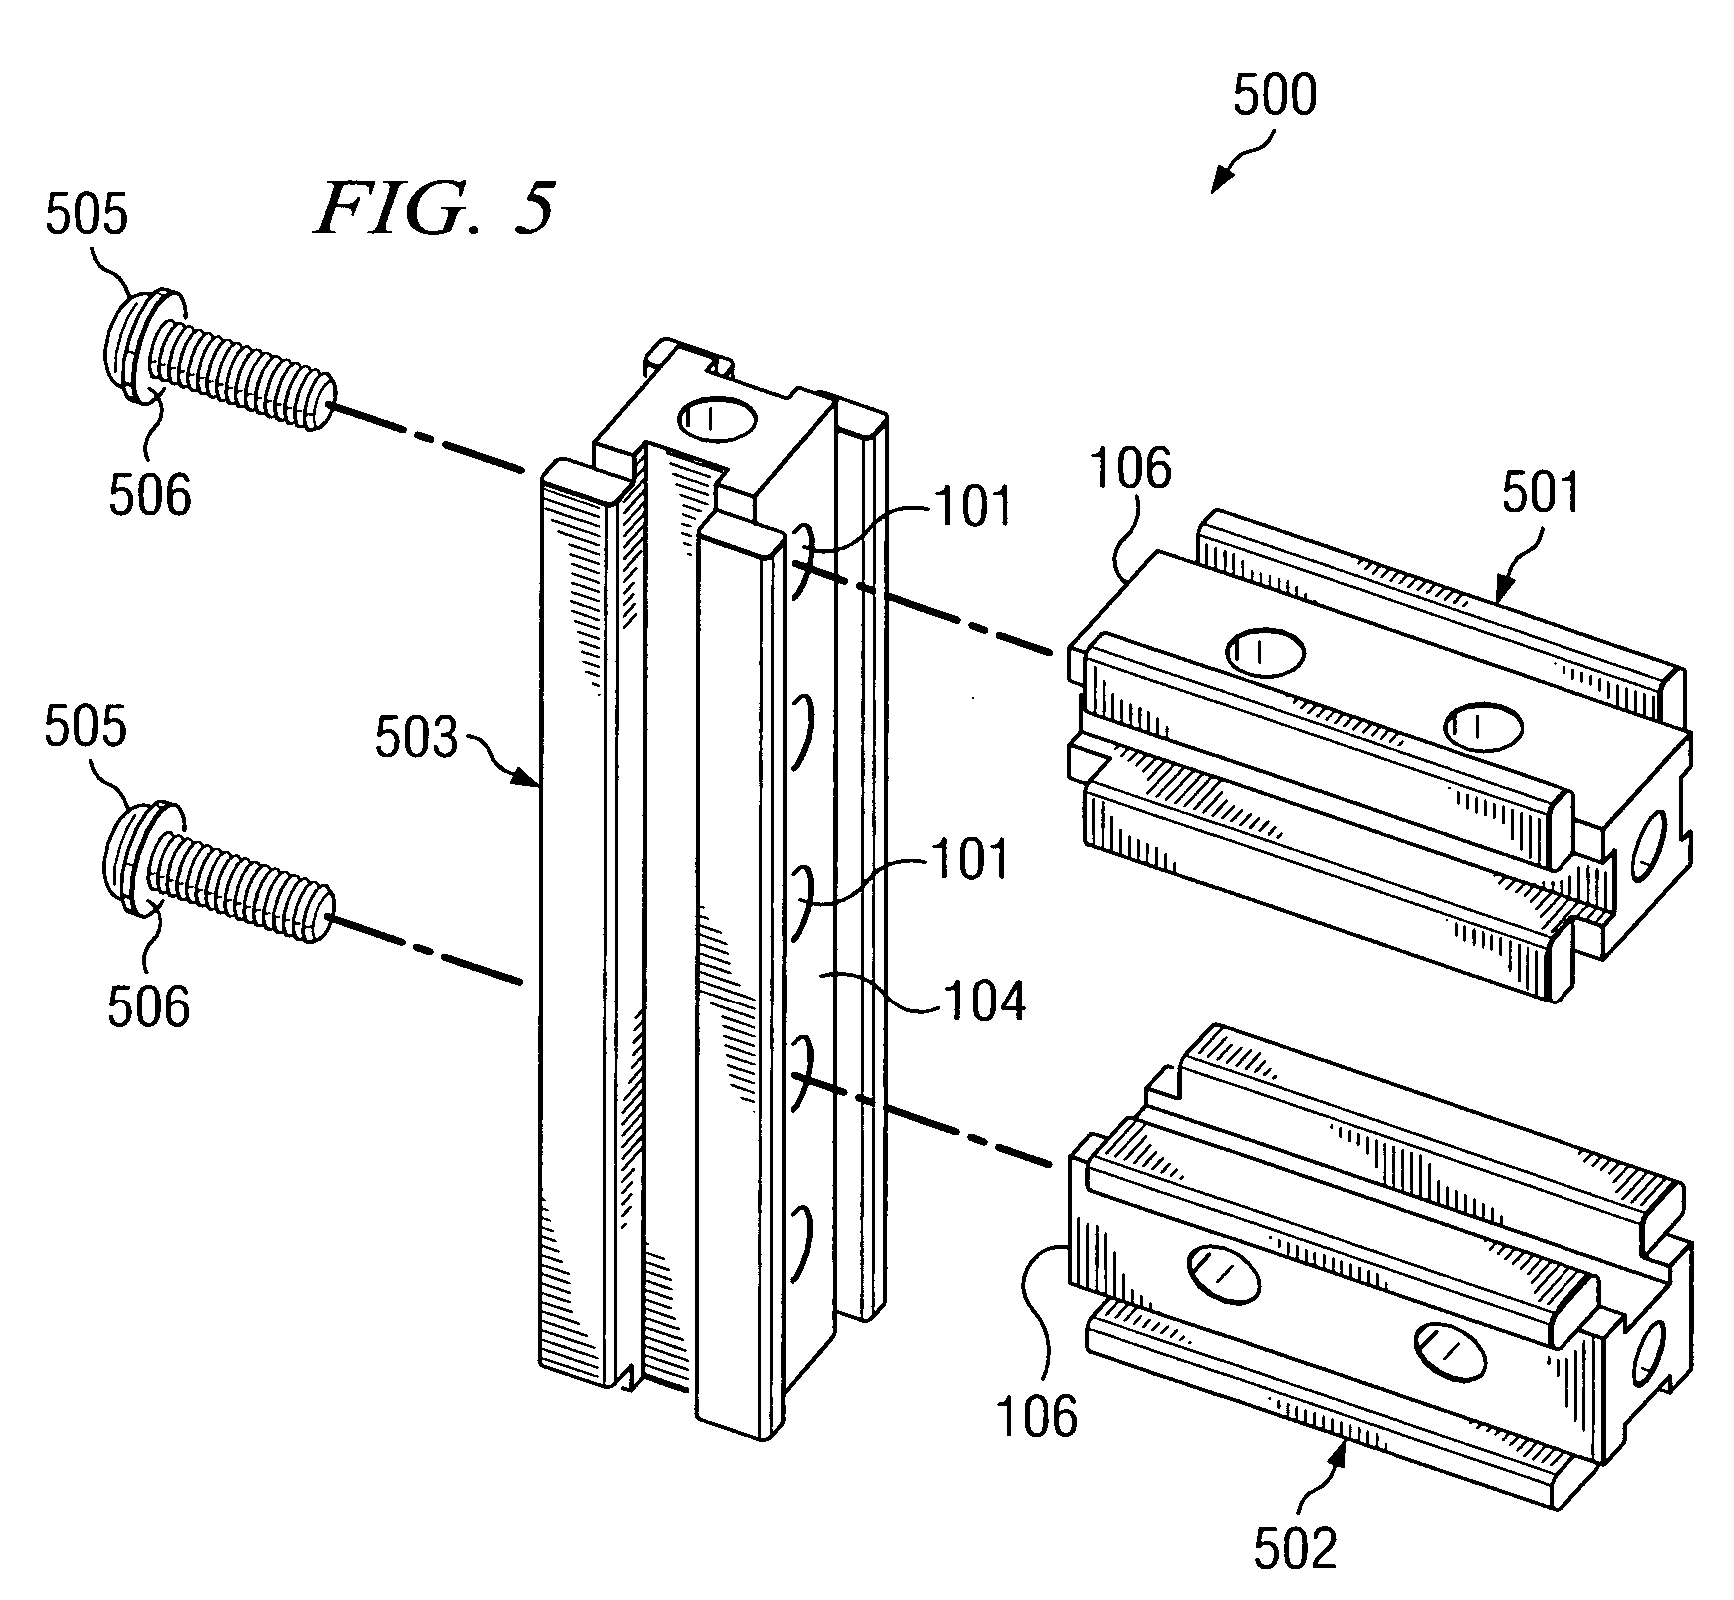 Systems and methods for modular instrument design and fabrication